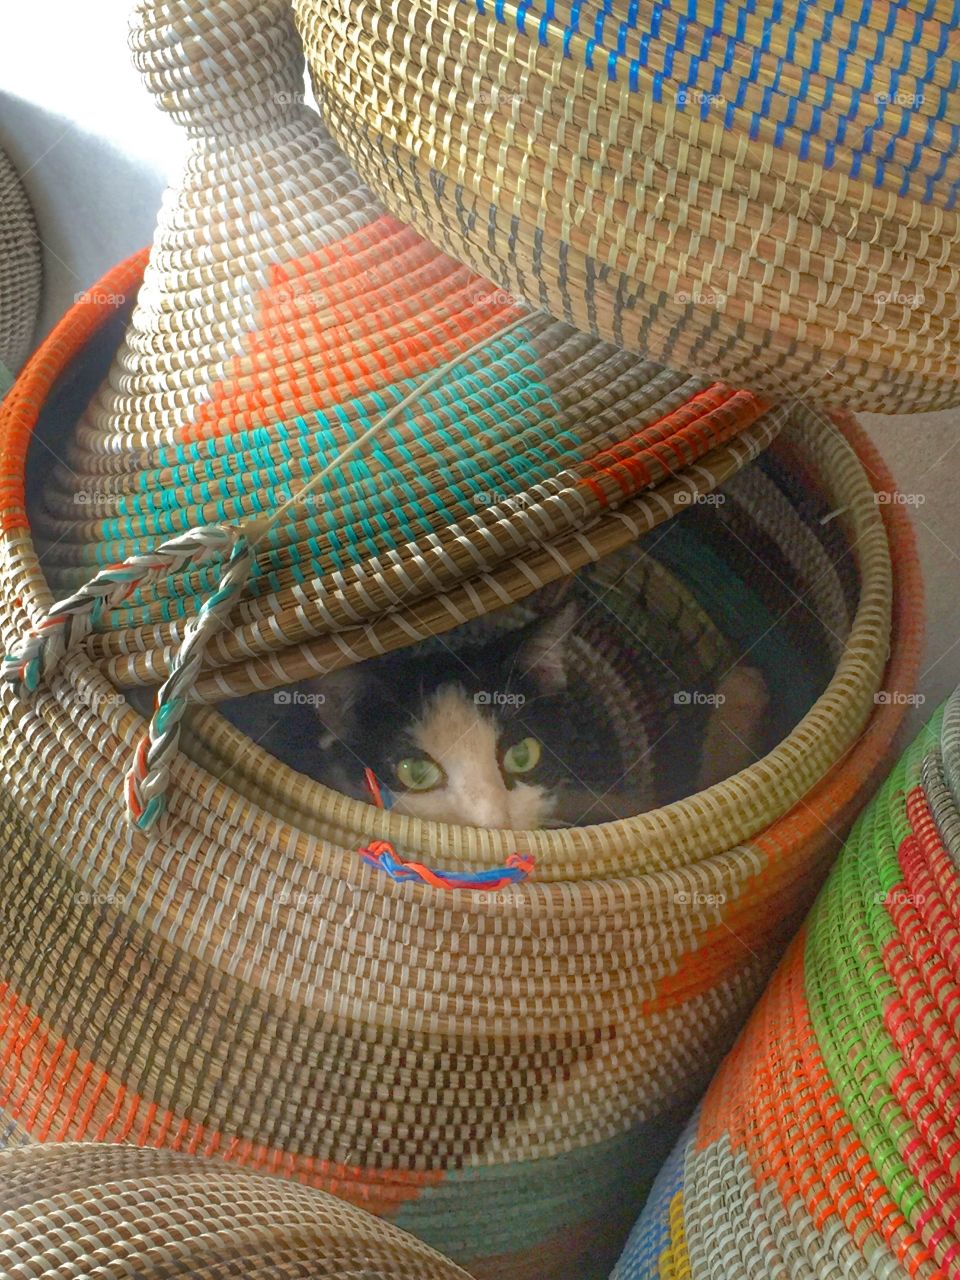 Kitty in a basket! This cutie was sleeping in a very comfy spot!